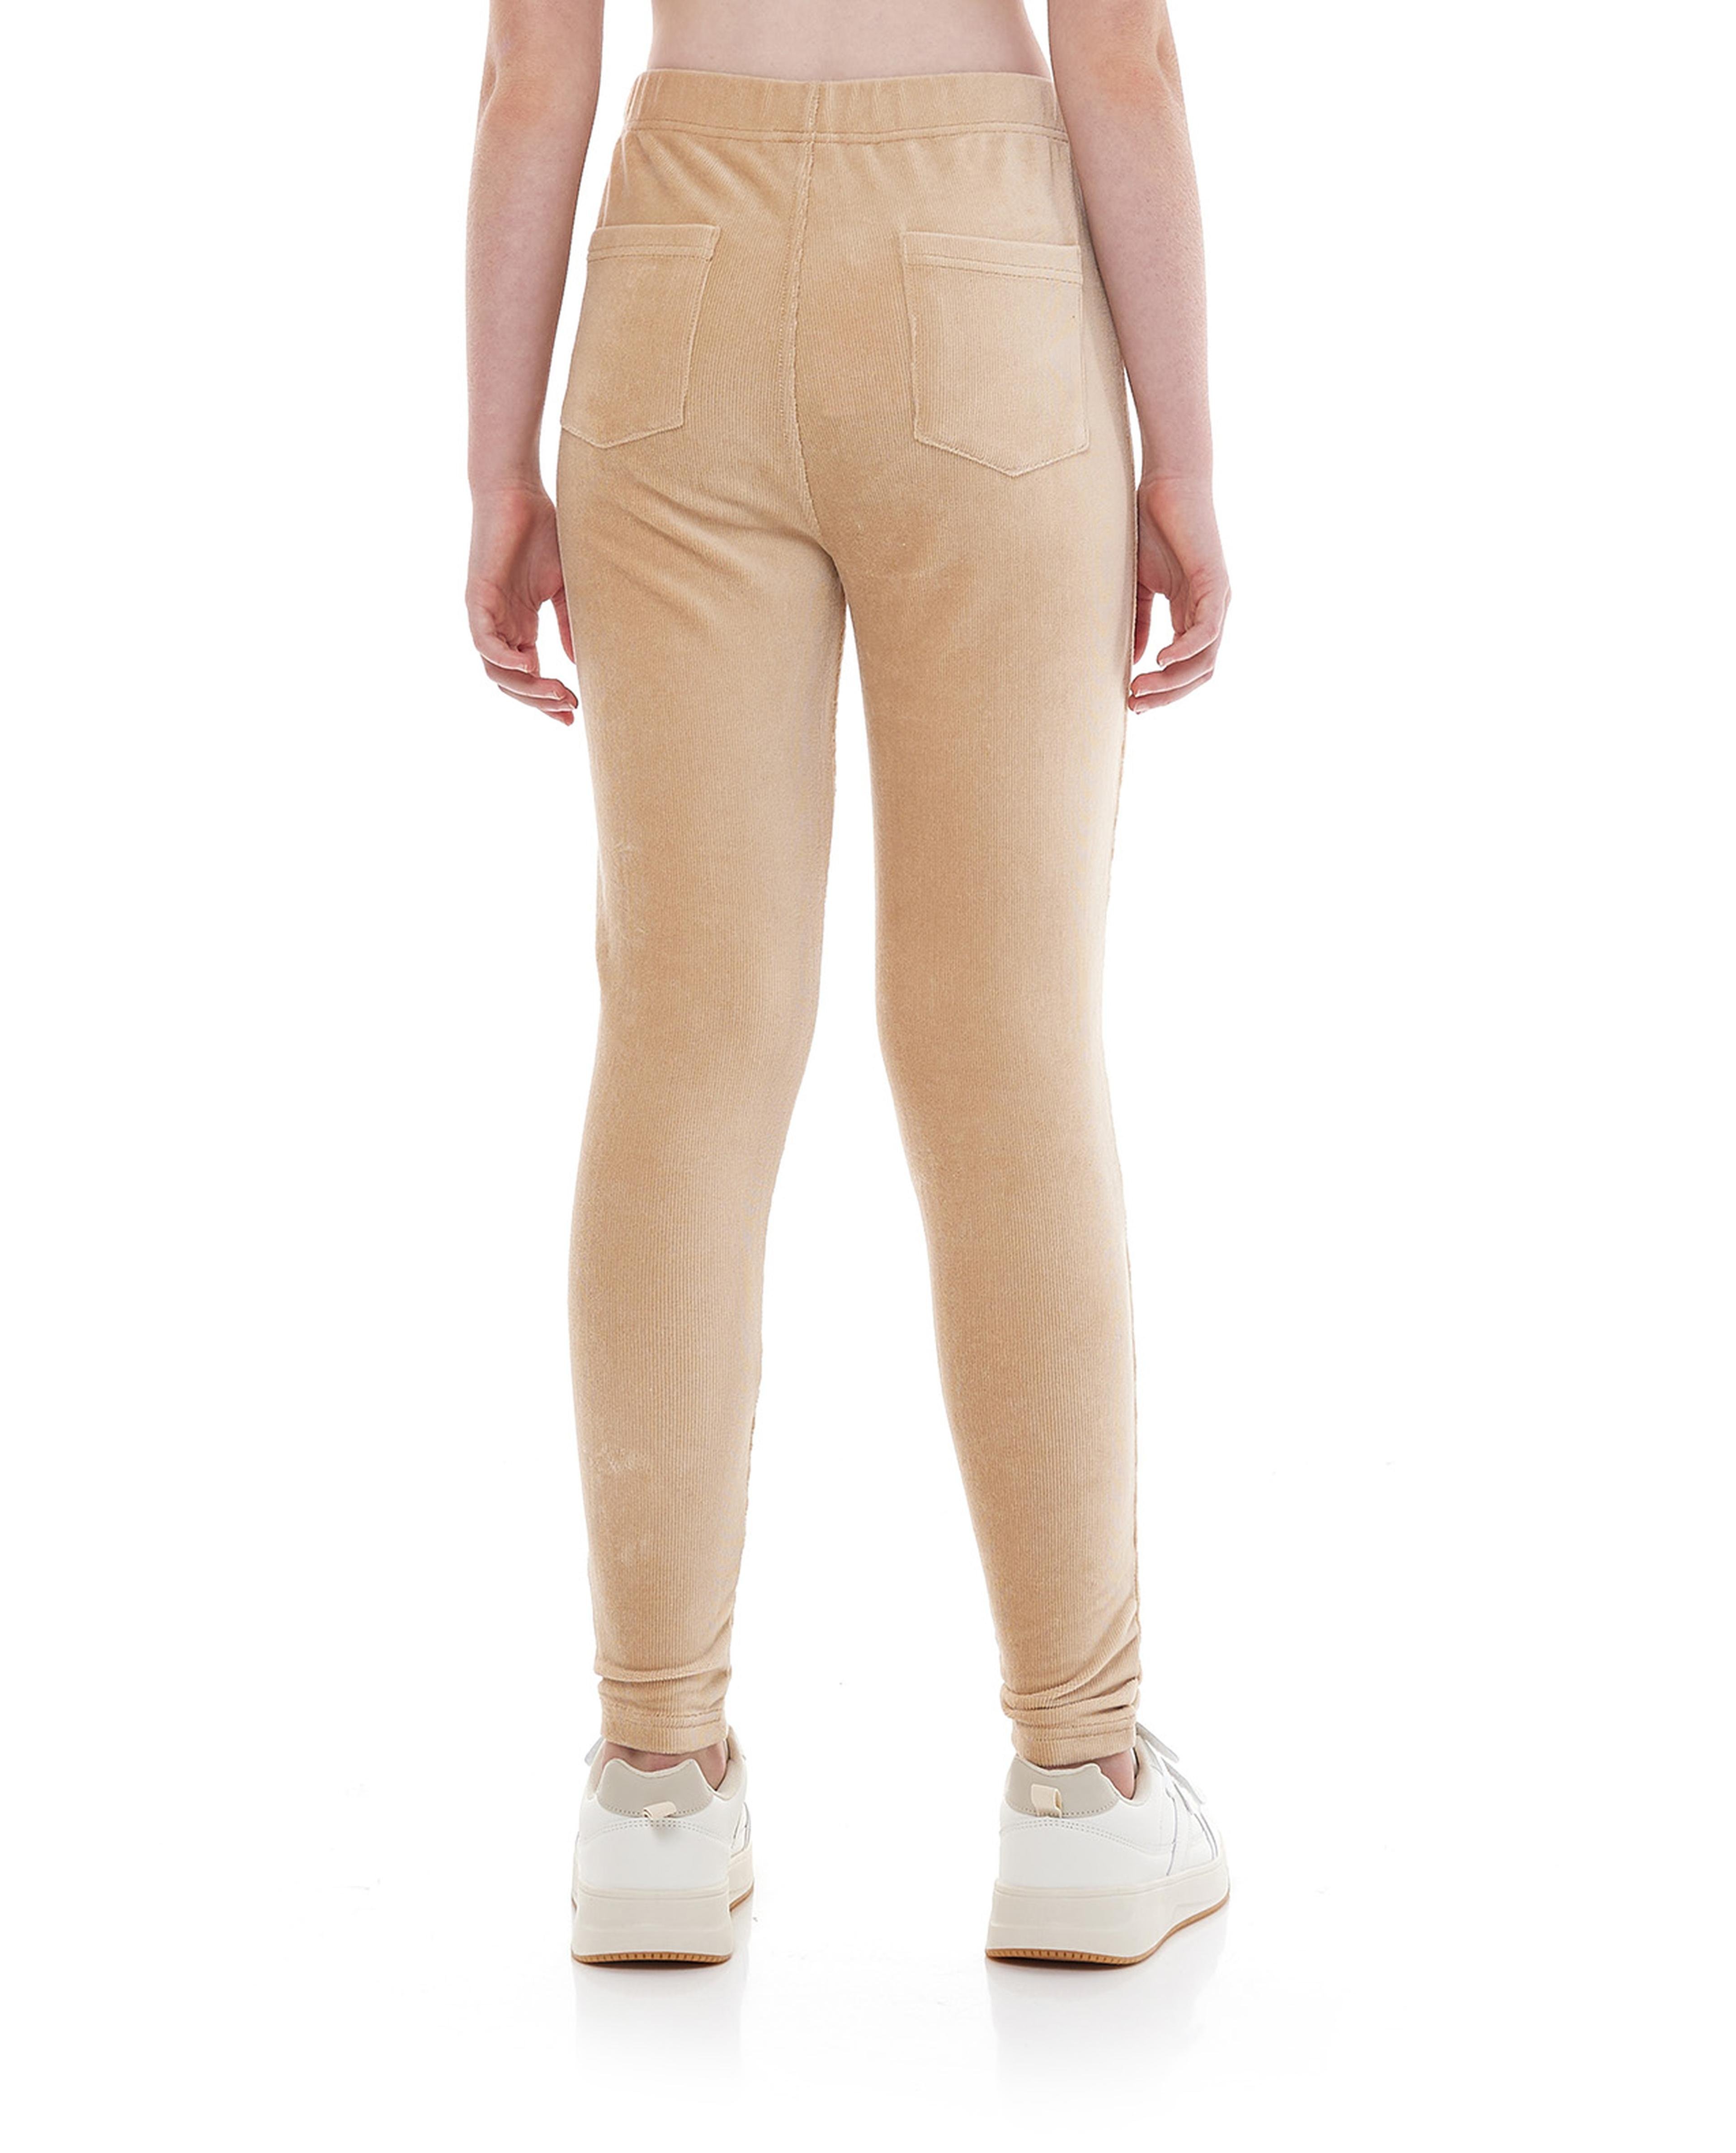 Solid Skinny Fit Pants with Elastic Waist